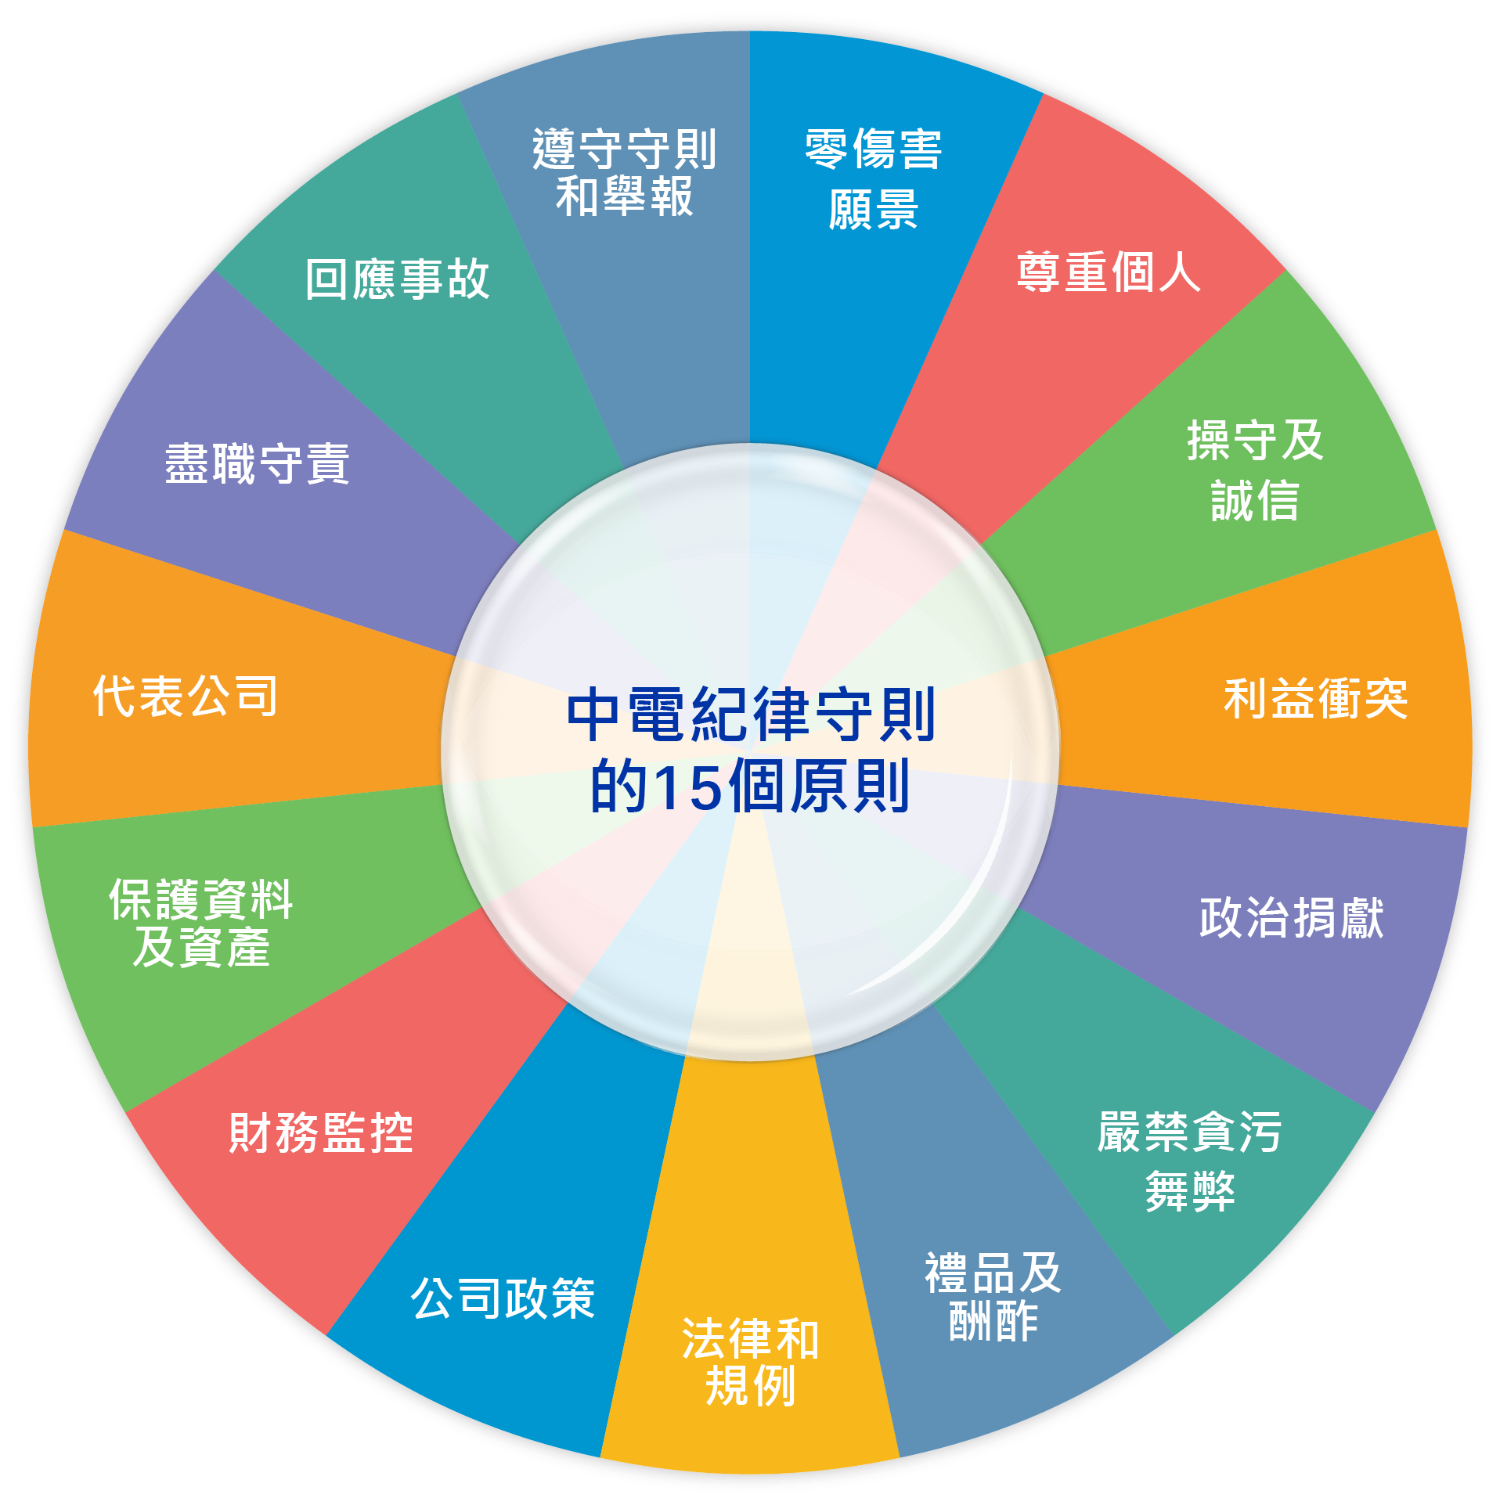 15_Principles_Code_of_Conduct_and_anti-corruption (Chinese).ai